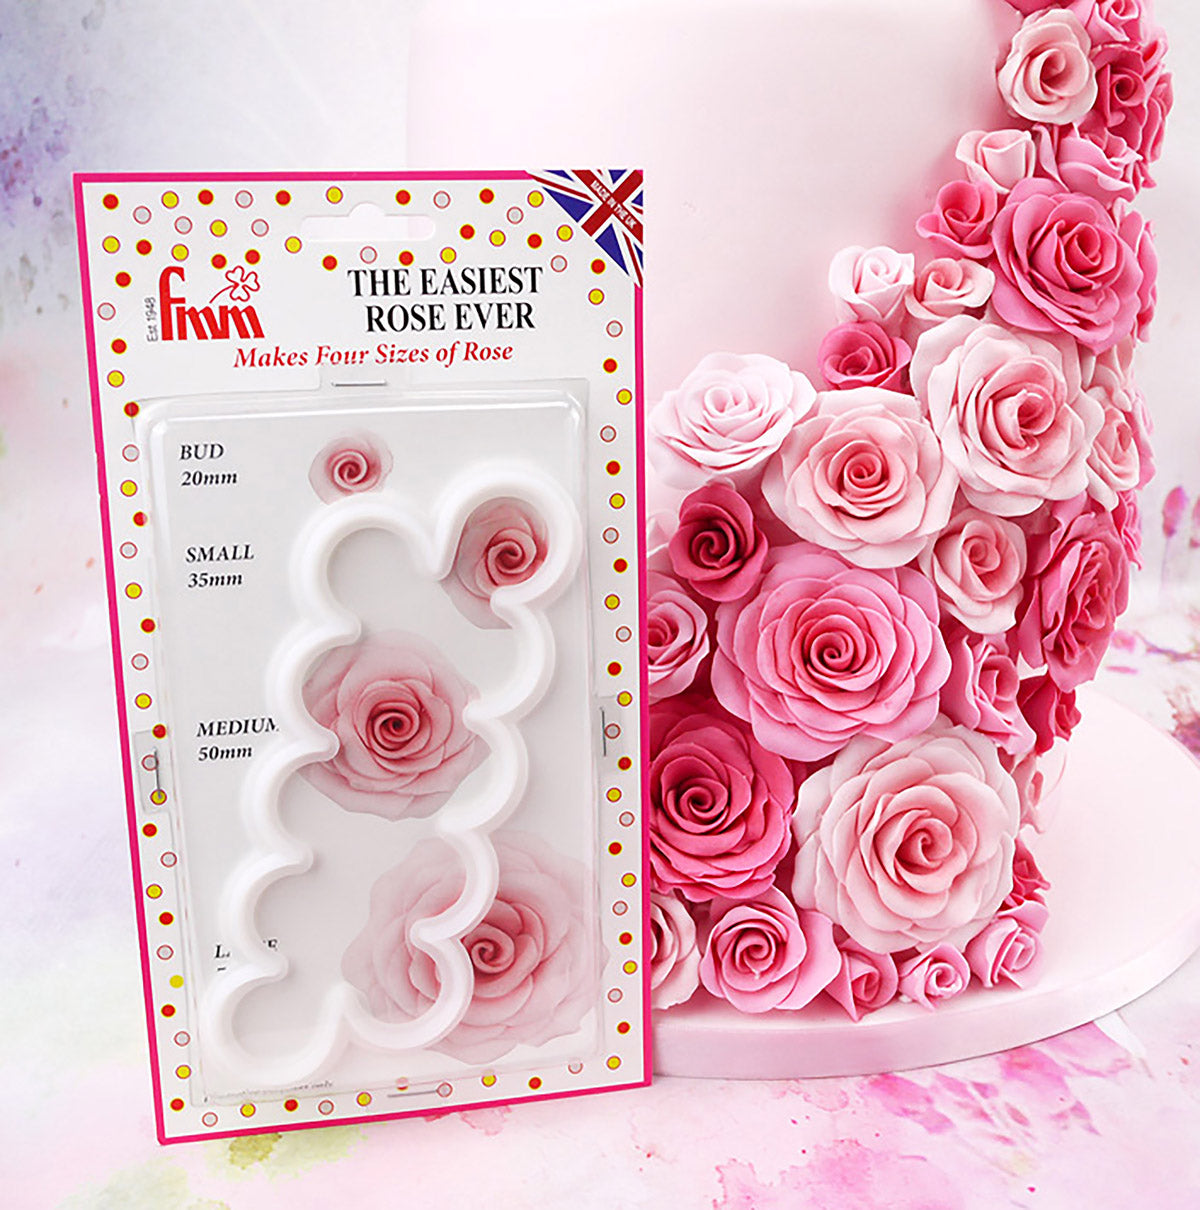 The Easiest Rose Ever cutter from FMM - FMM Sugarcraft